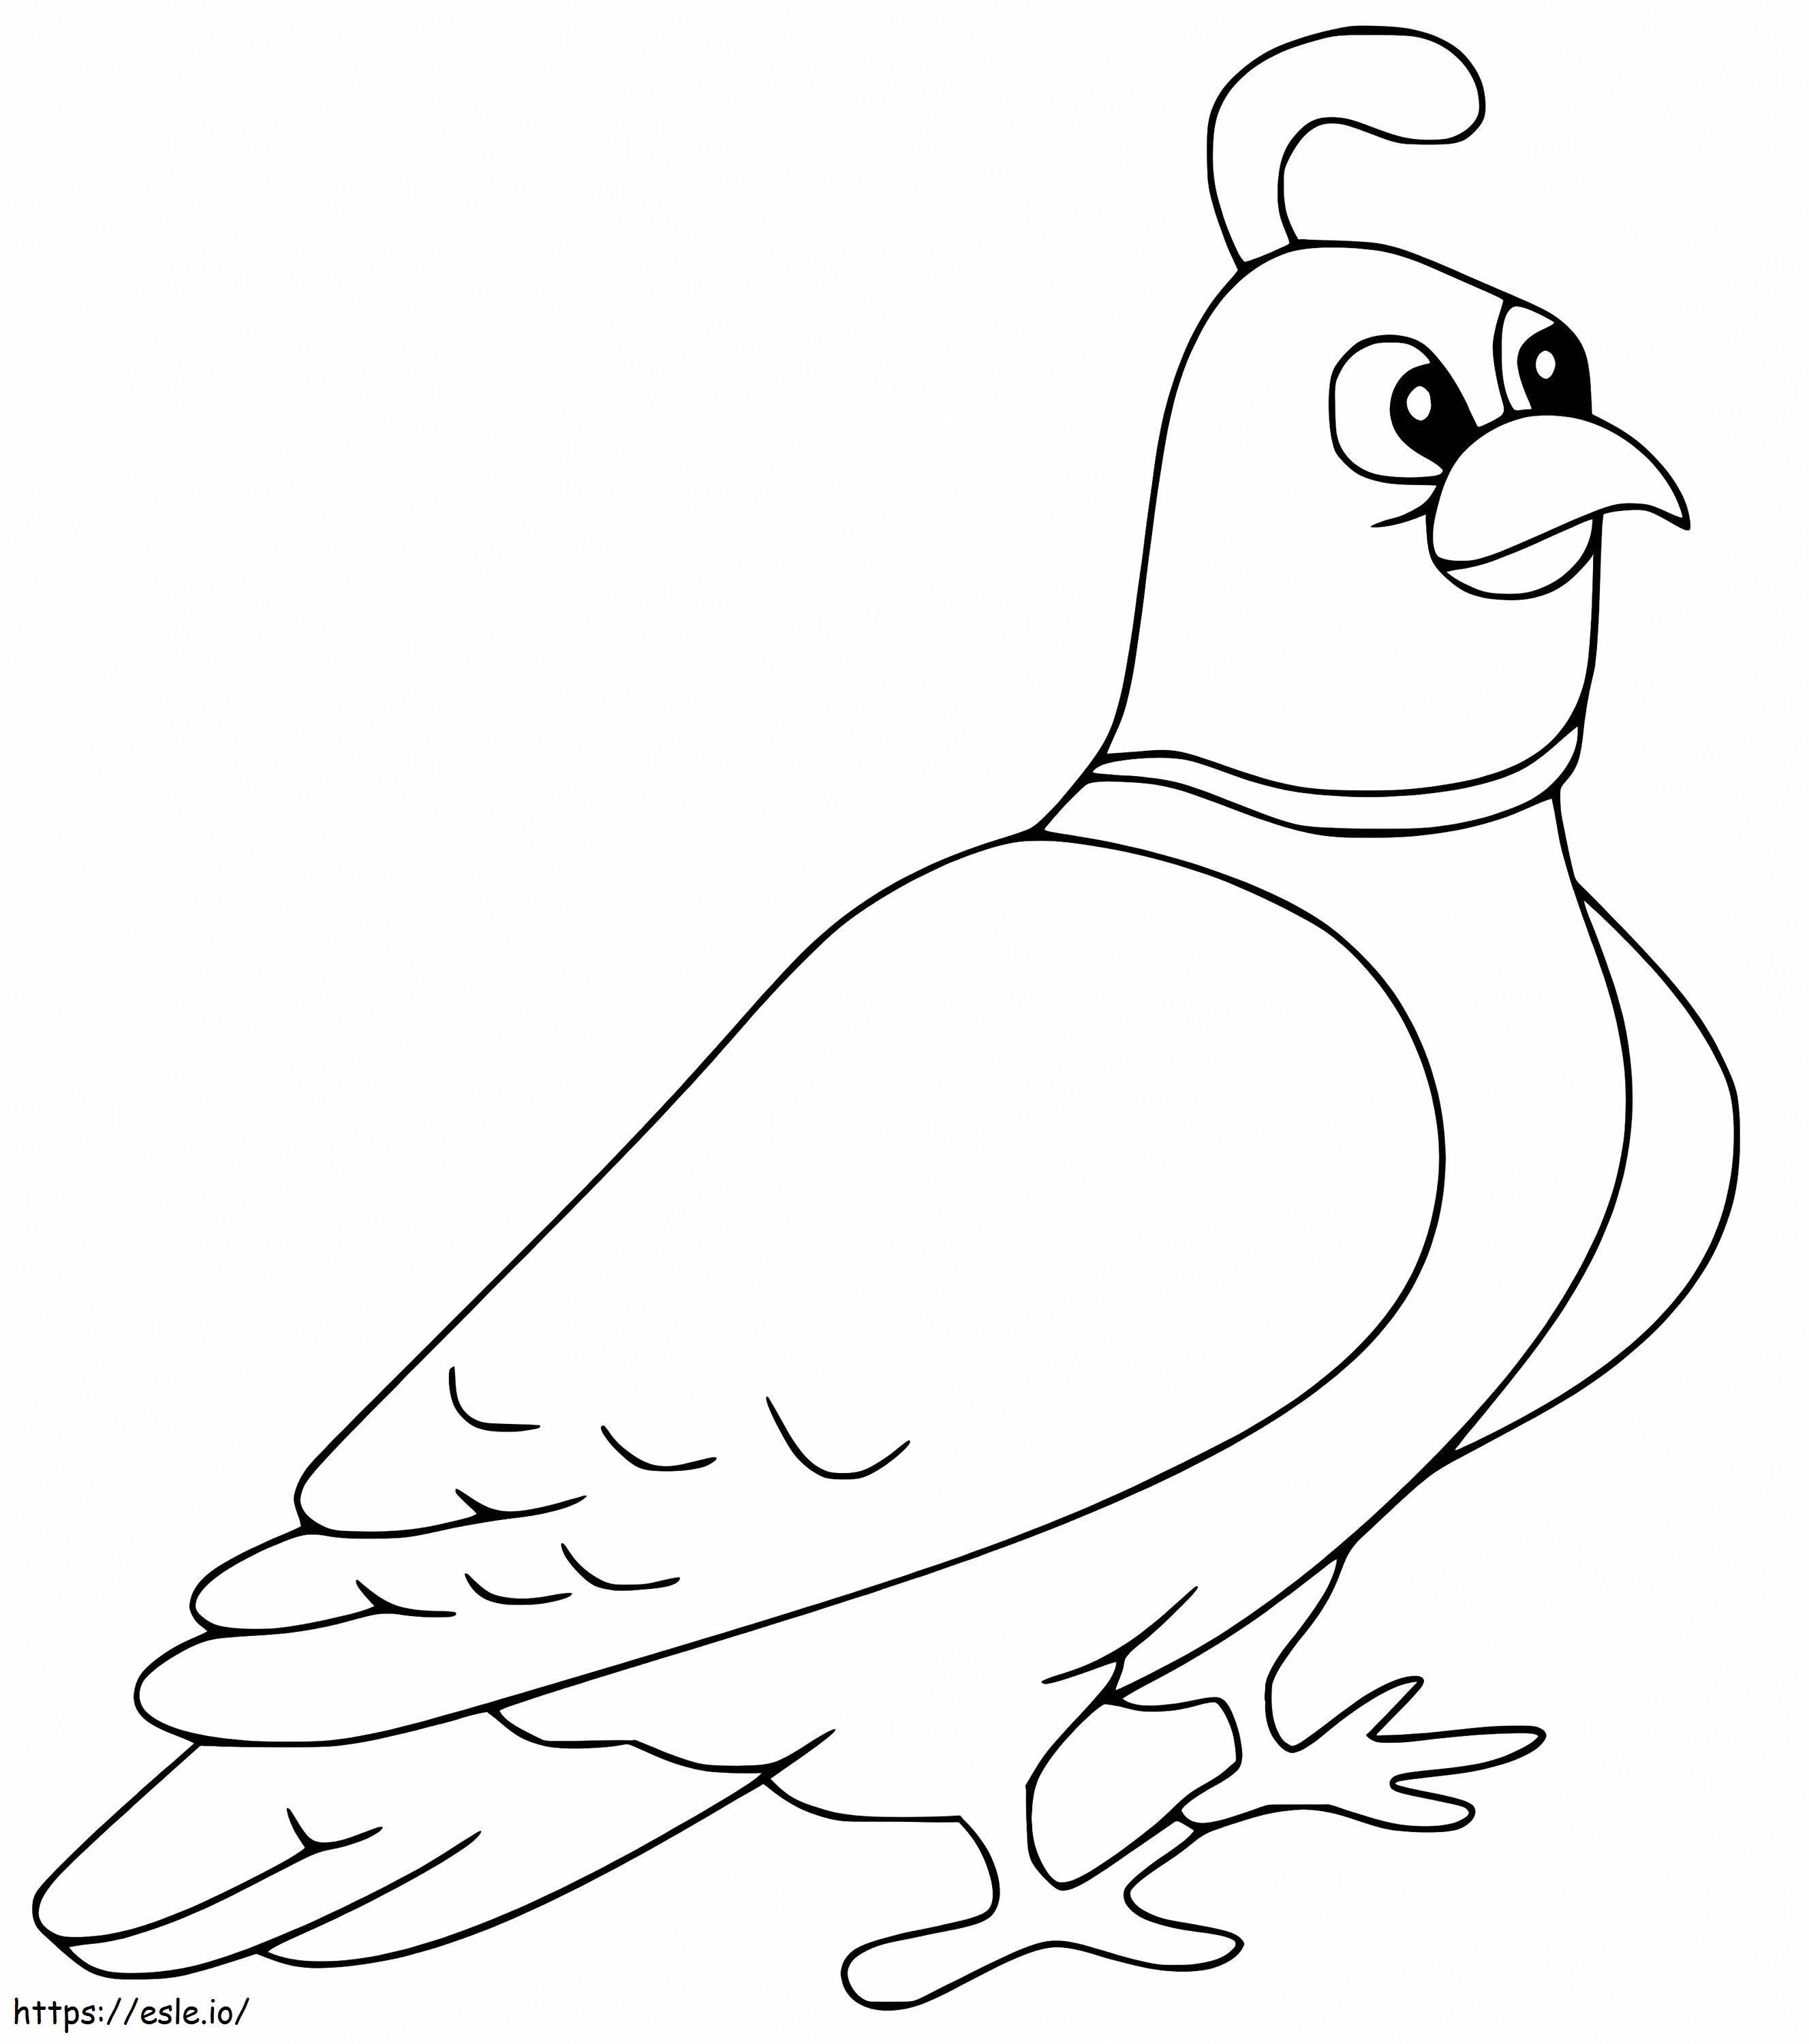 Happy Quail coloring page